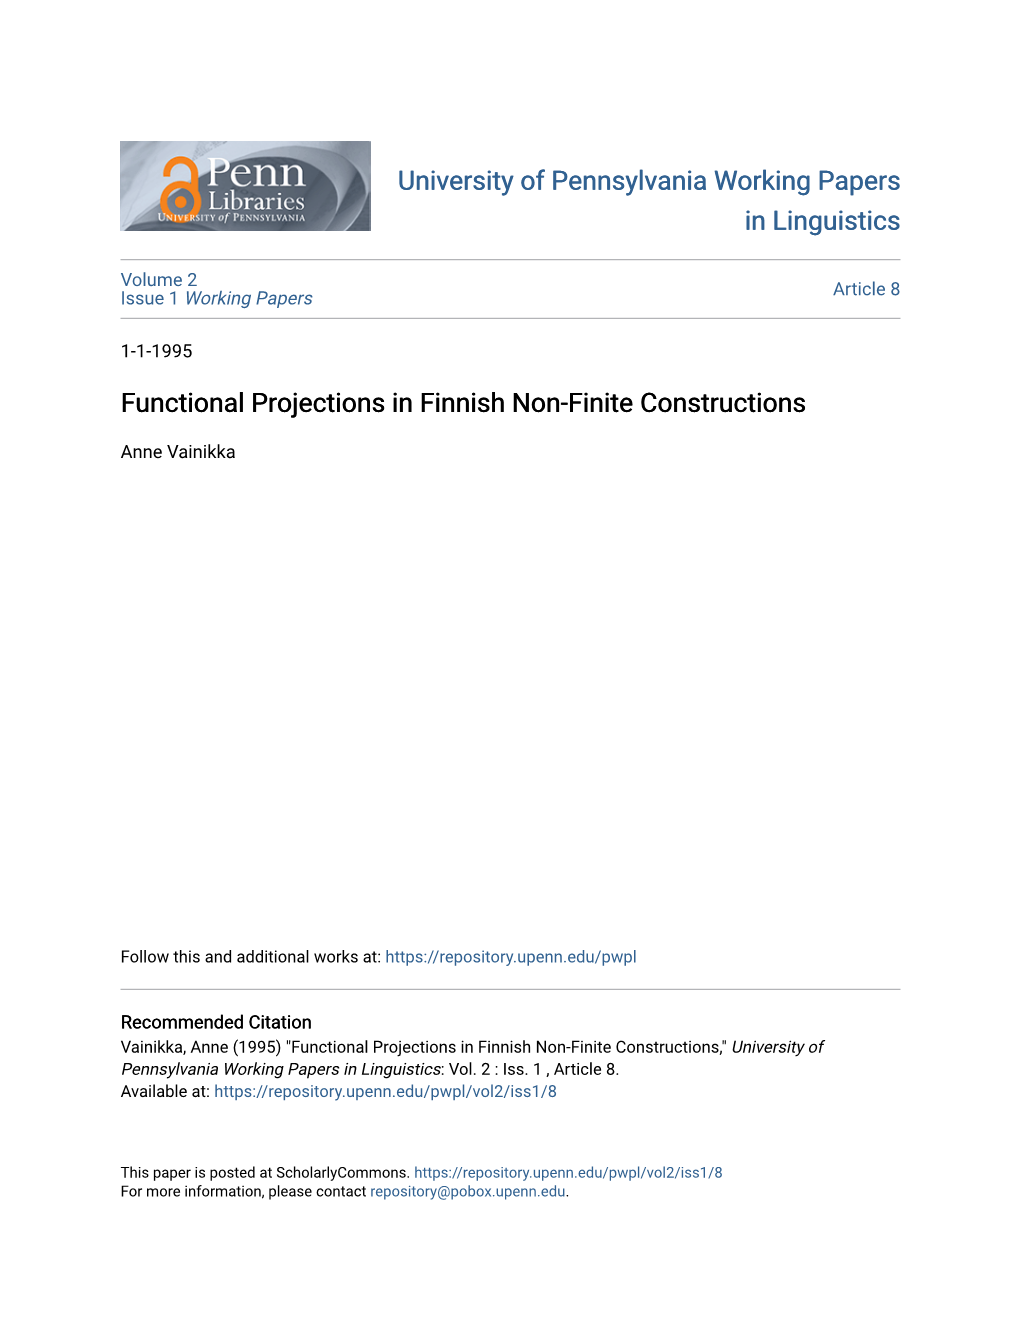 Functional Projections in Finnish Non-Finite Constructions